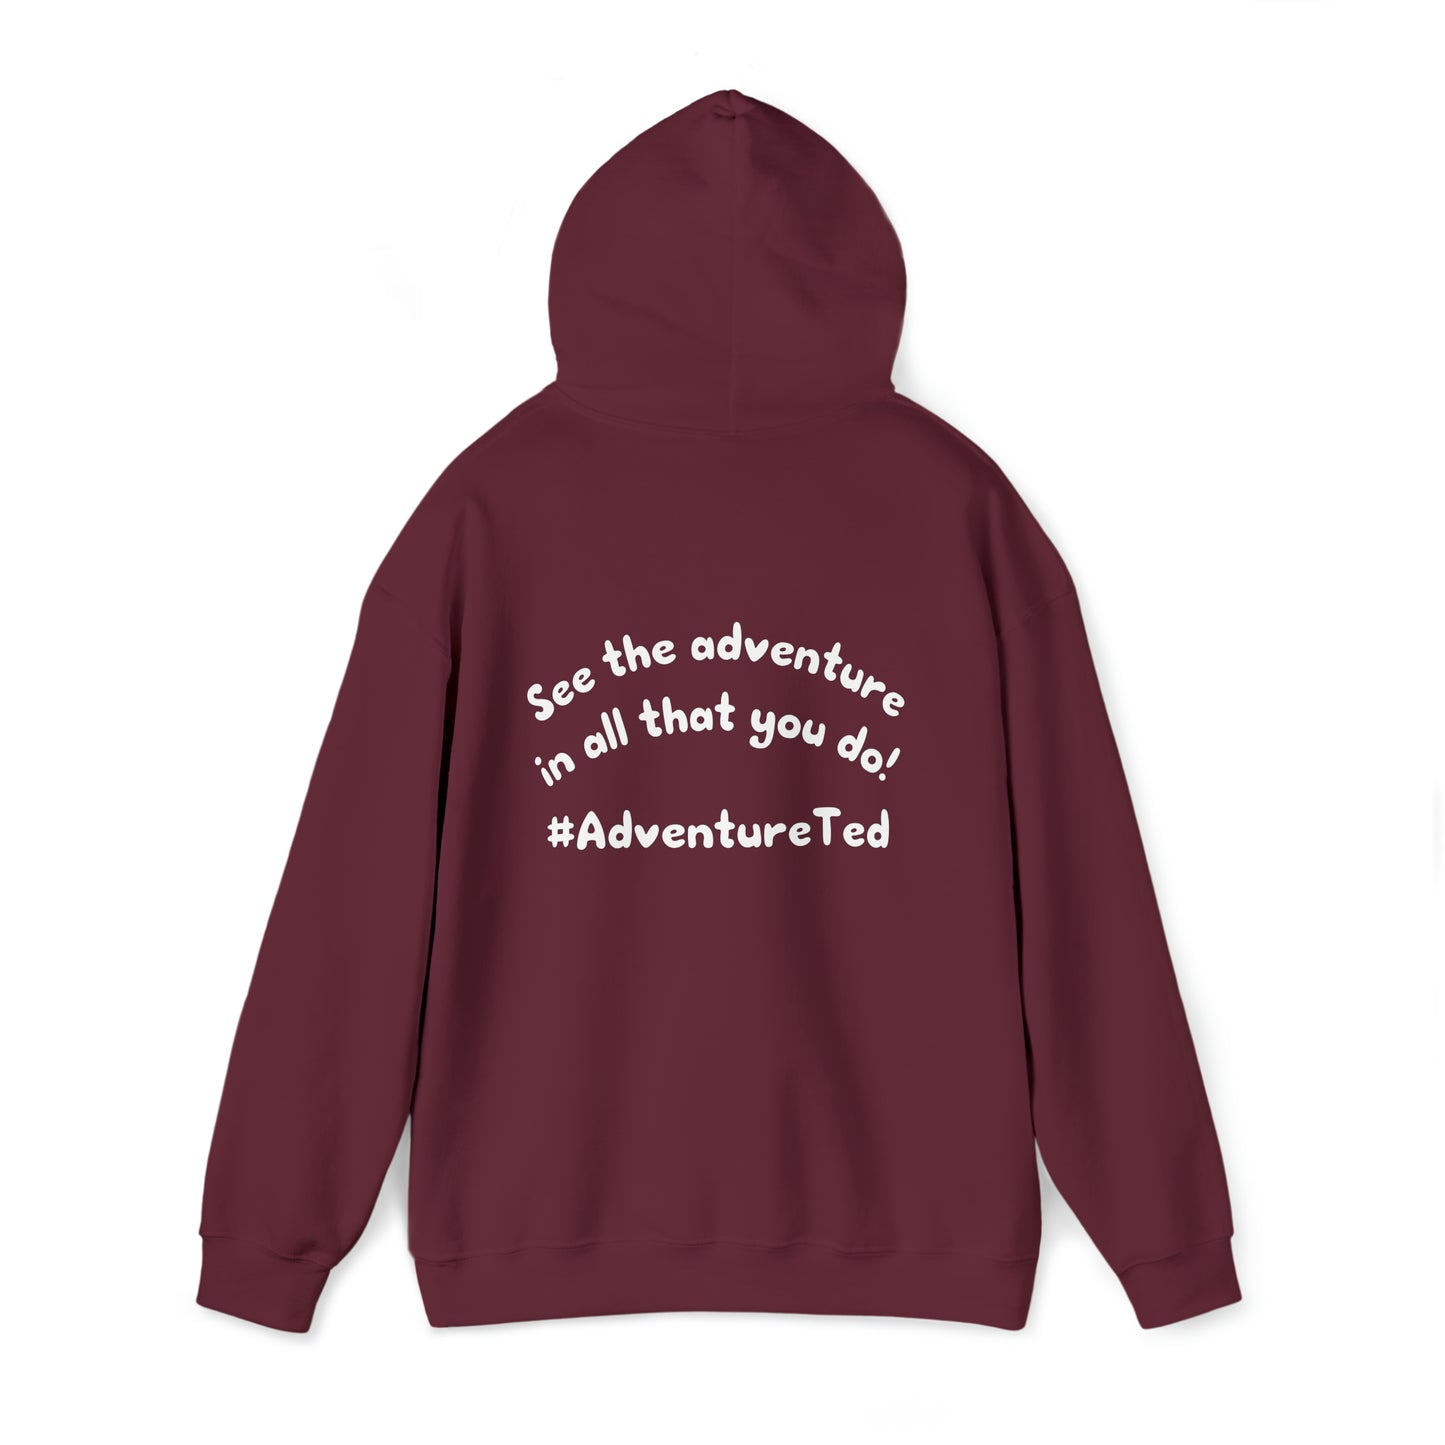 Adventure Ted Chats Hoodie